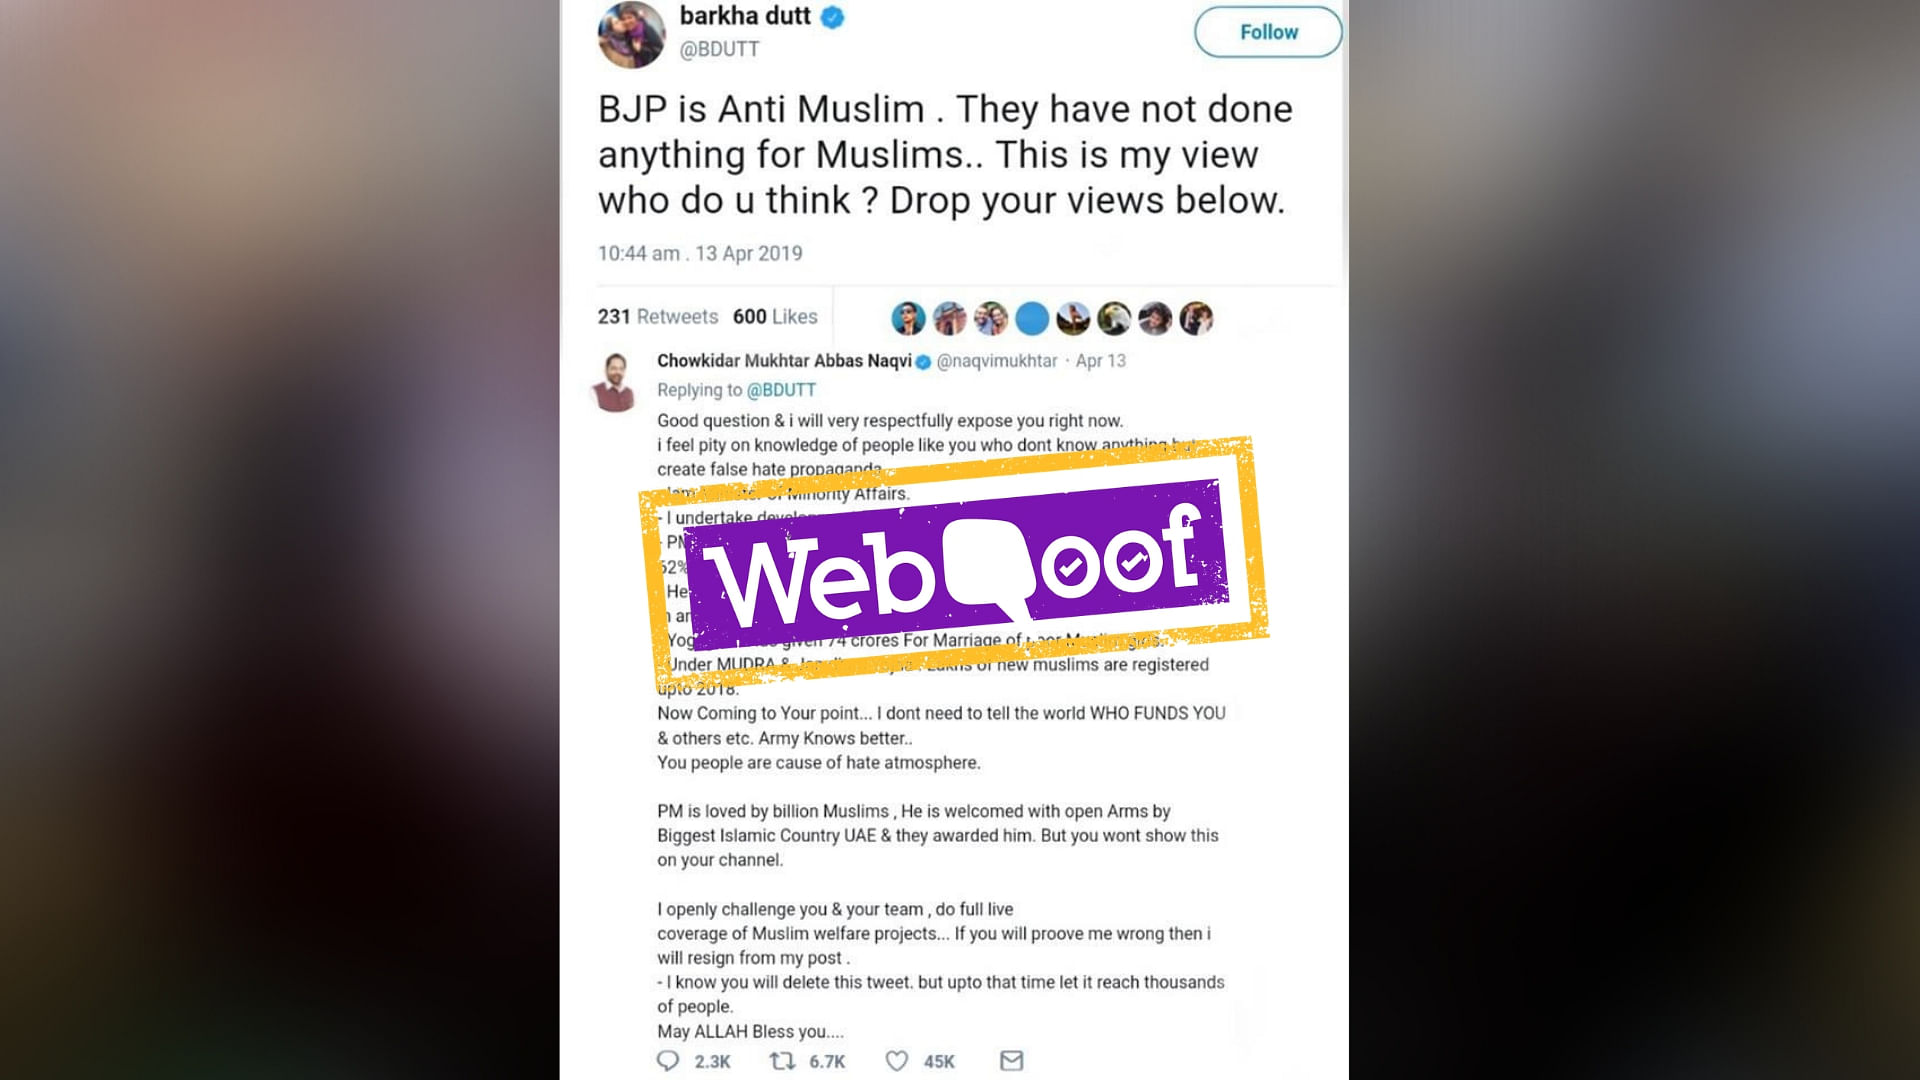 The screenshot is fake and has been digitally created, as confirmed by Barkha Dutt herself.